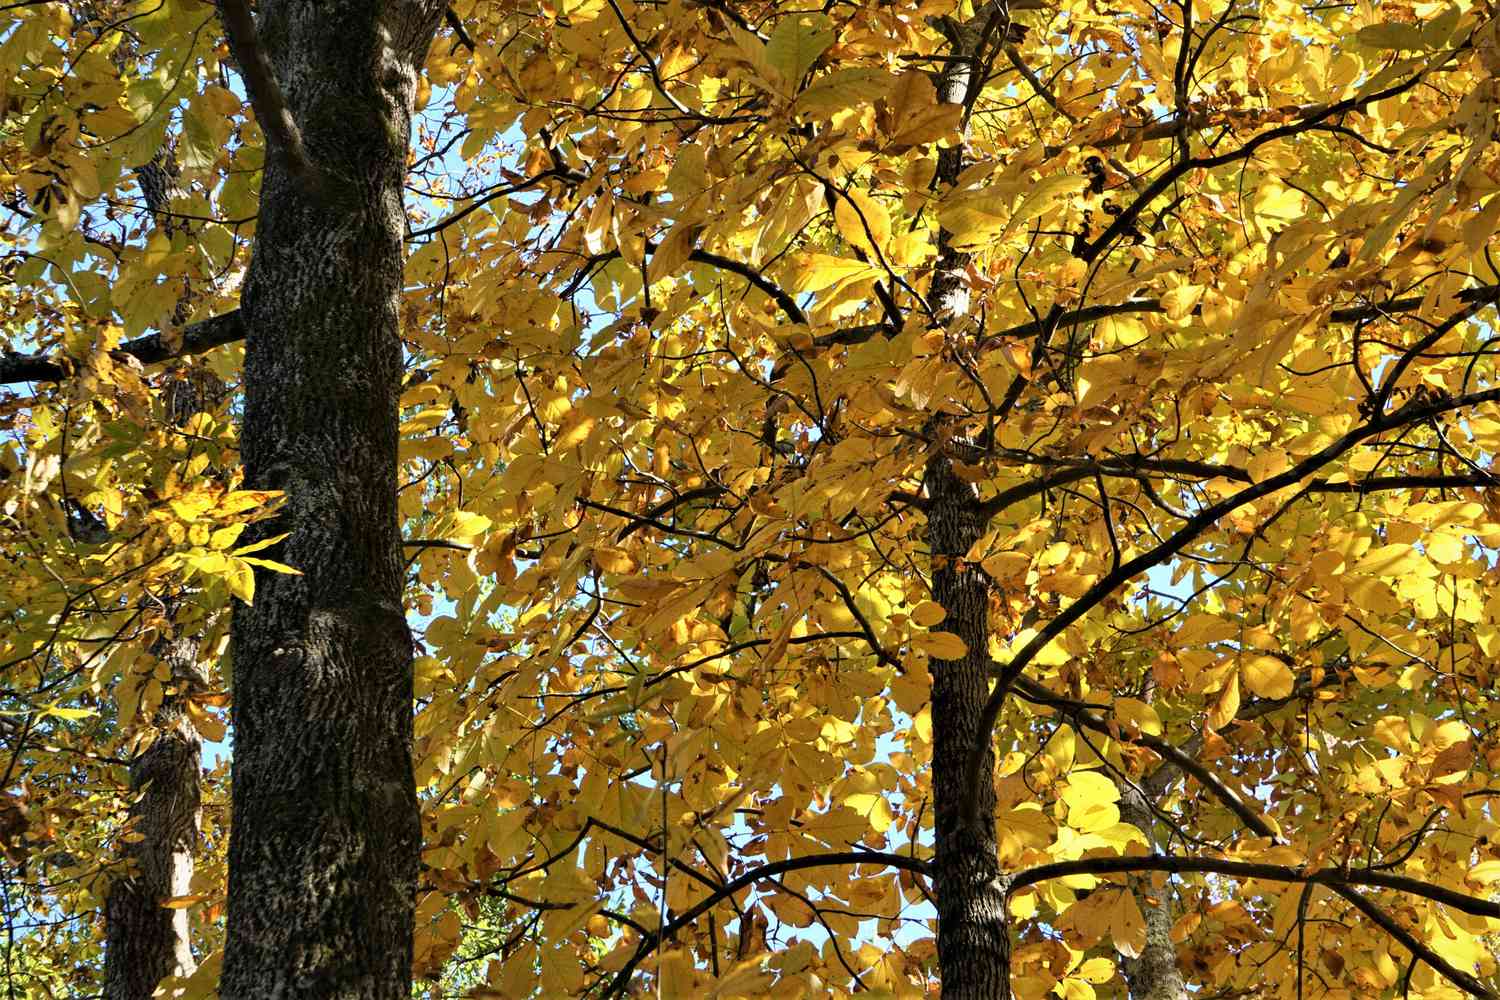 Mockernut Hickory stand in the fall showing its yellow foliage.